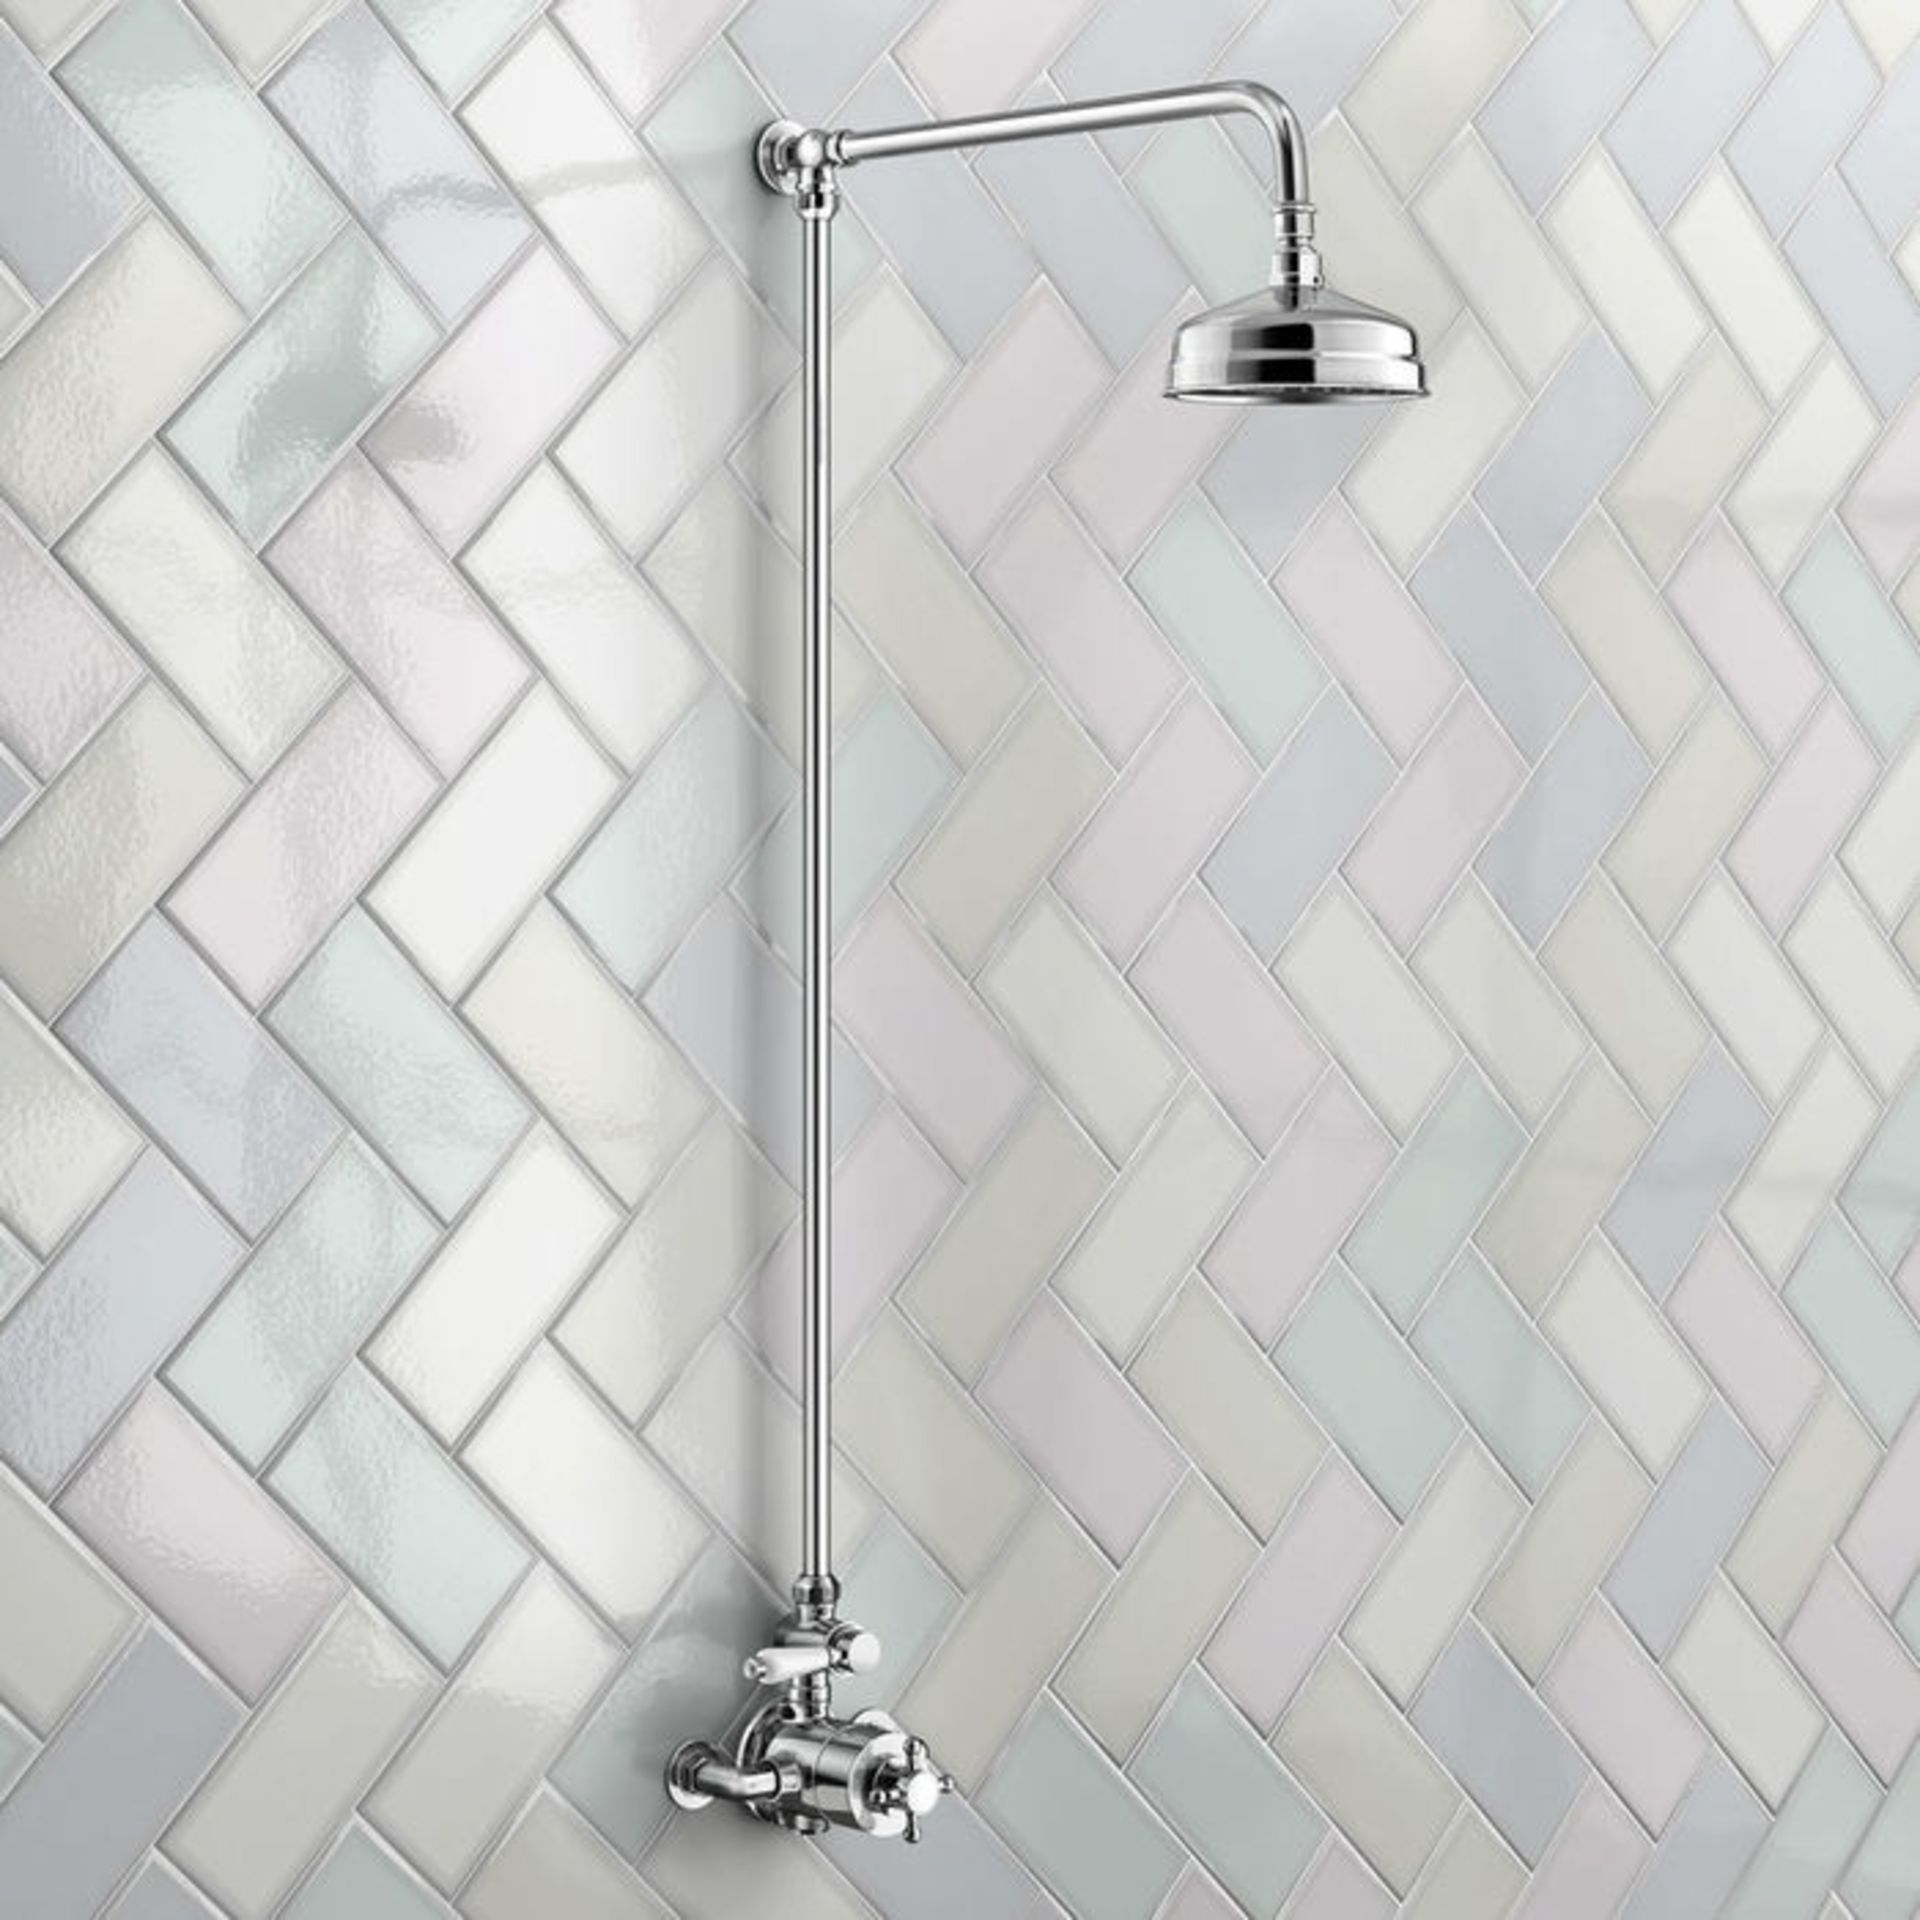 (EW66) Traditional Exposed Thermostatic Shower Kit & Medium Head. Traditional exposed valve - Image 3 of 3